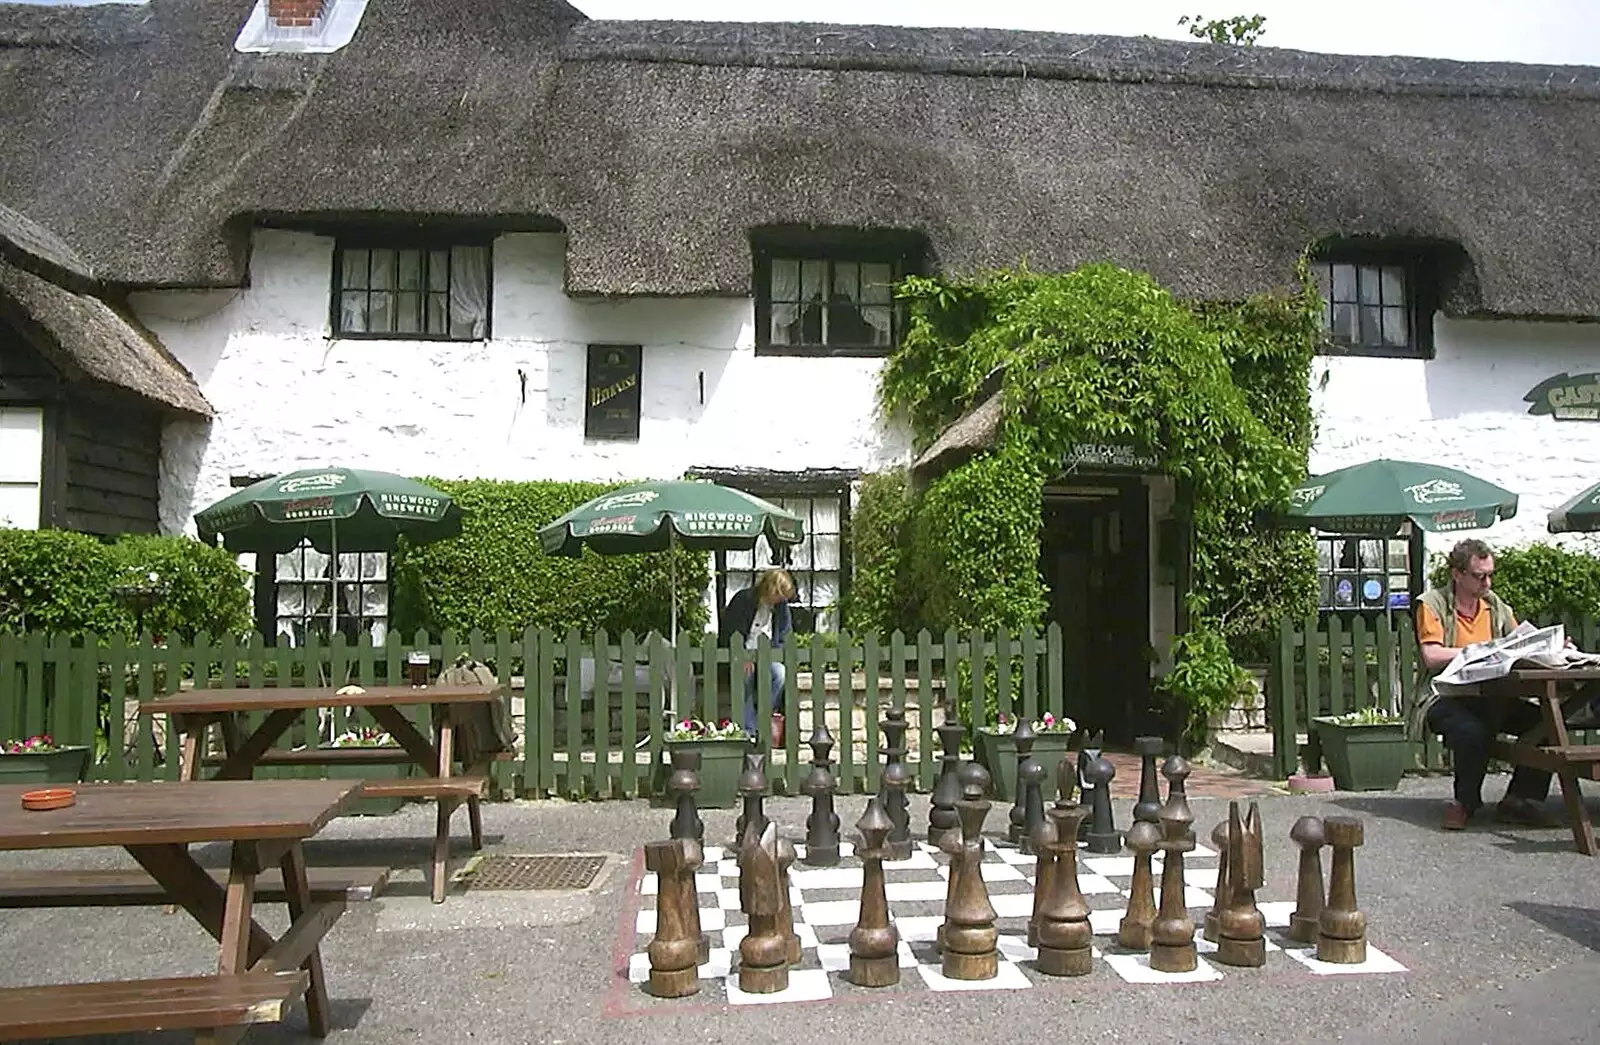 A giant chess set outside the Castle Inn, Lulworth, from Corfe Castle Camping, Corfe, Dorset - 30th May 2004